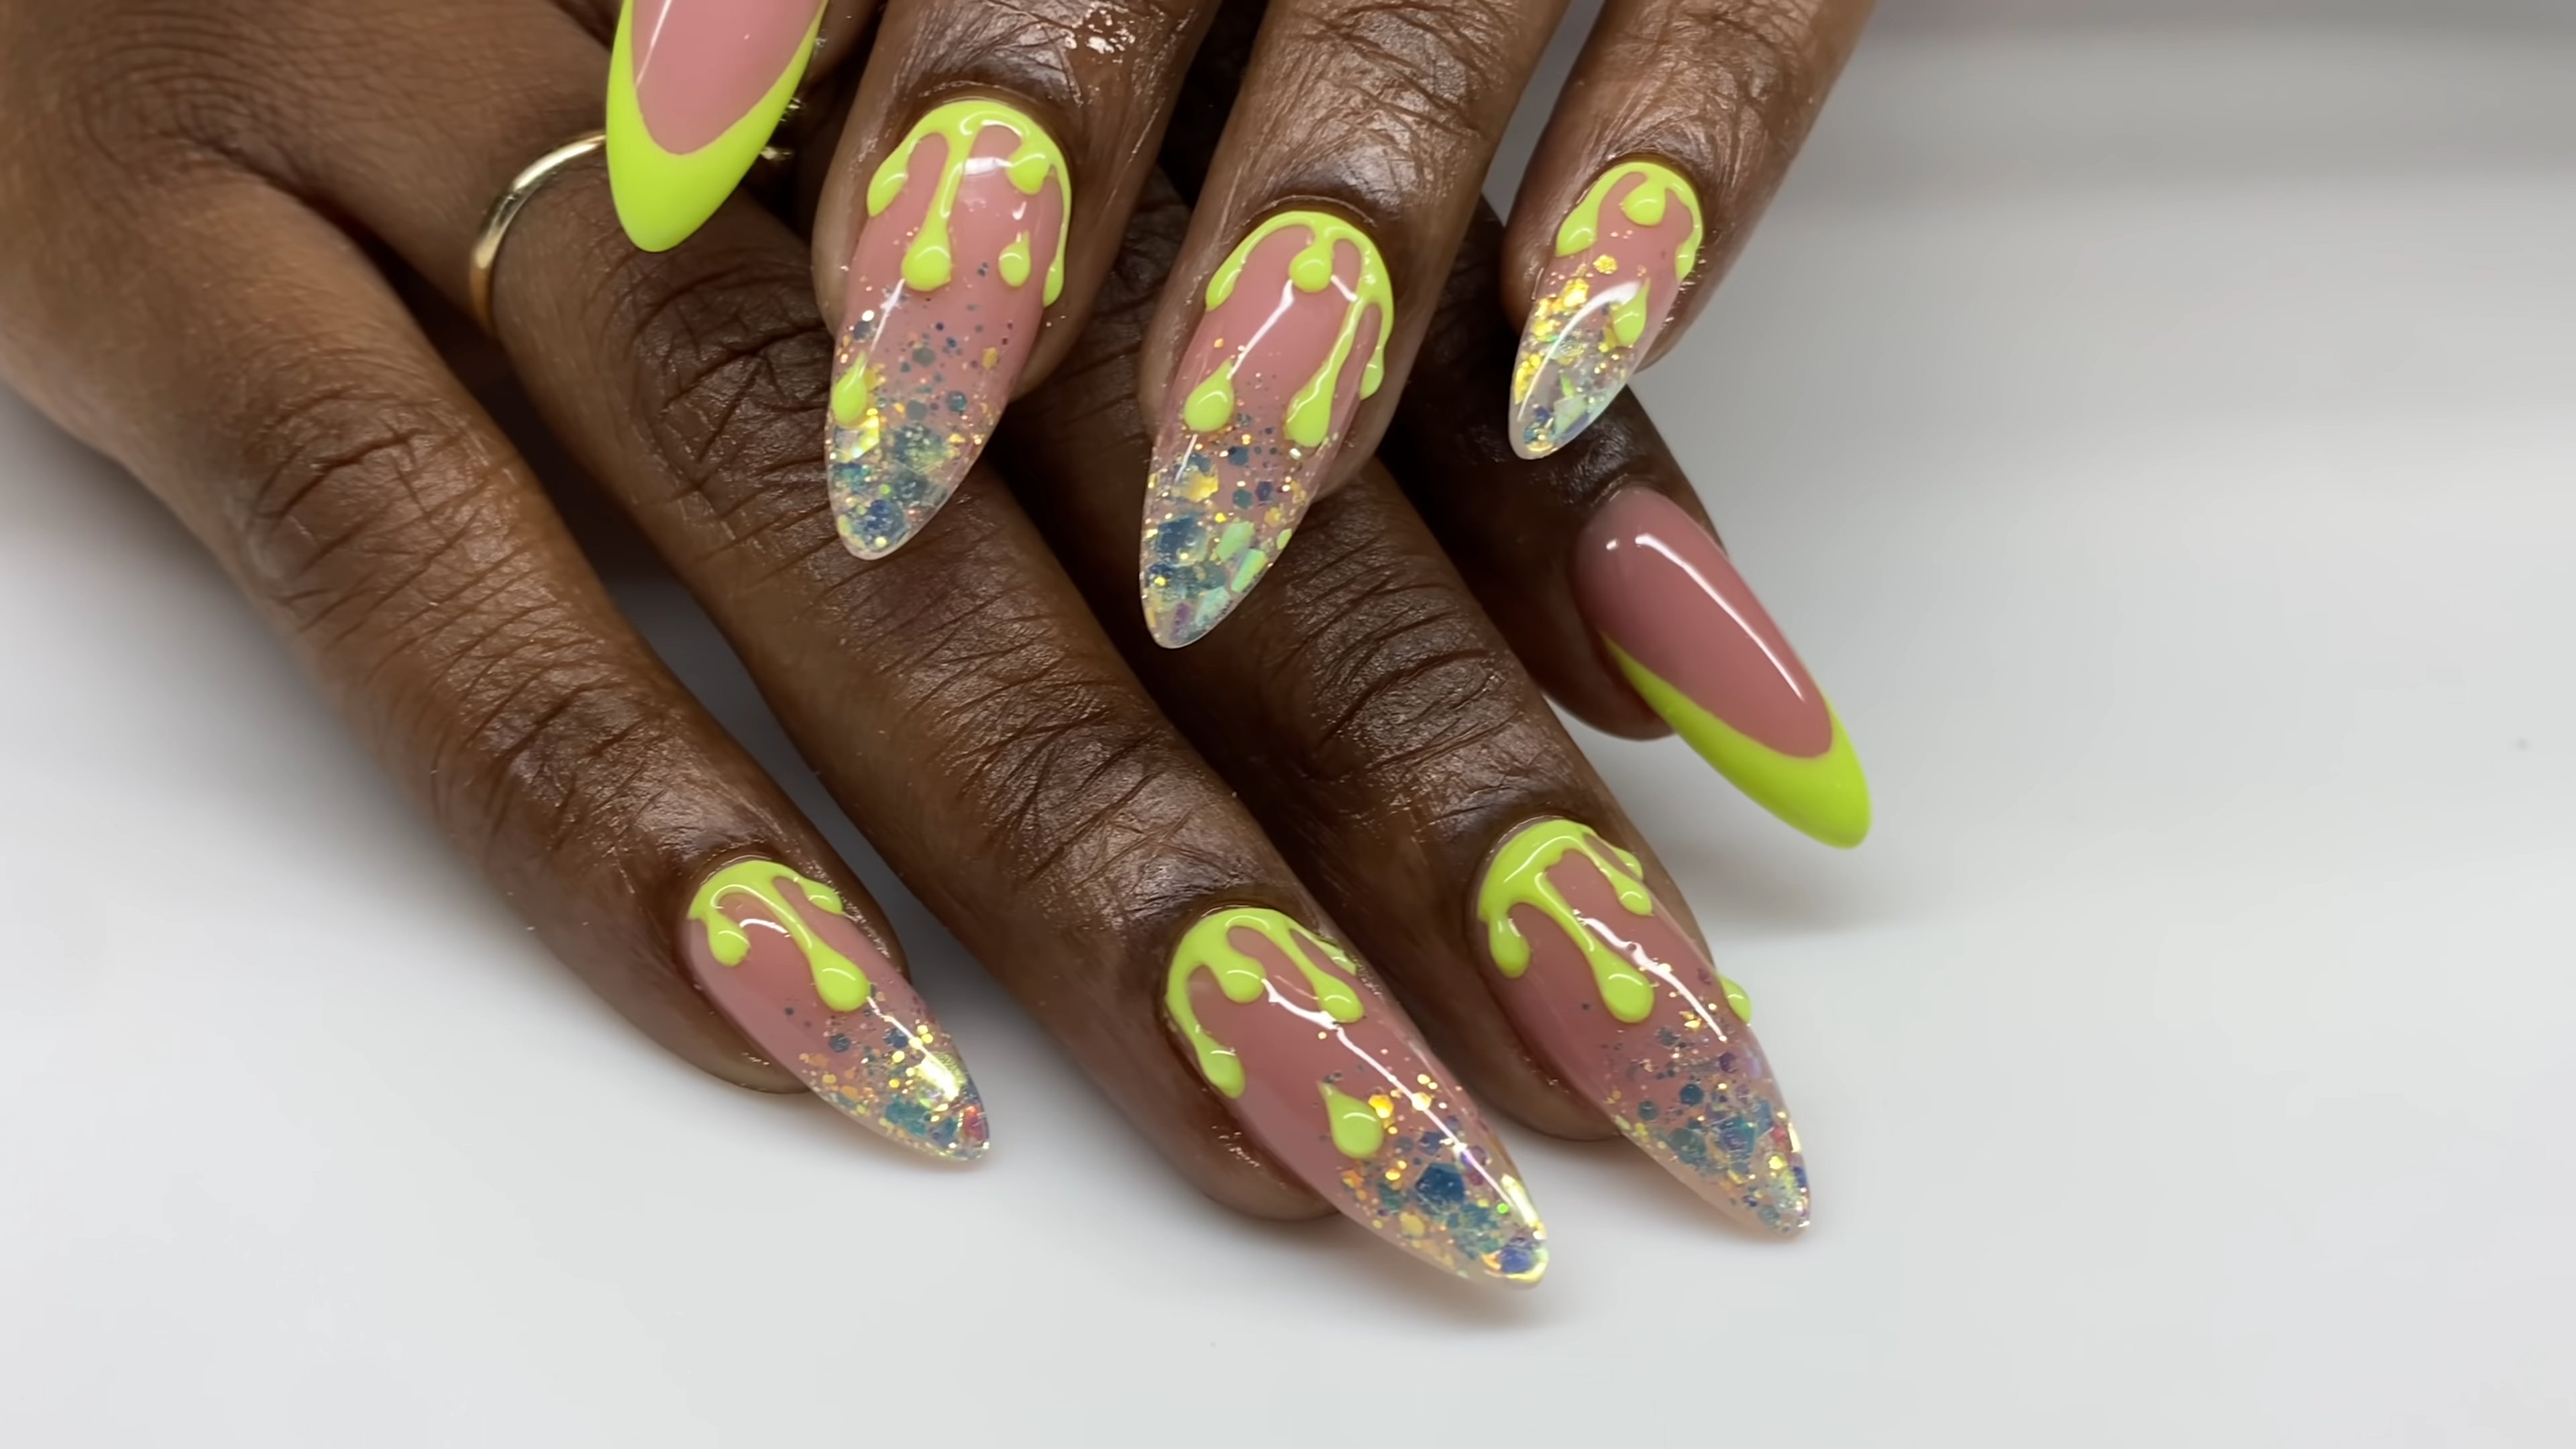 Different colored nails with patterns. | Source: Getty Images